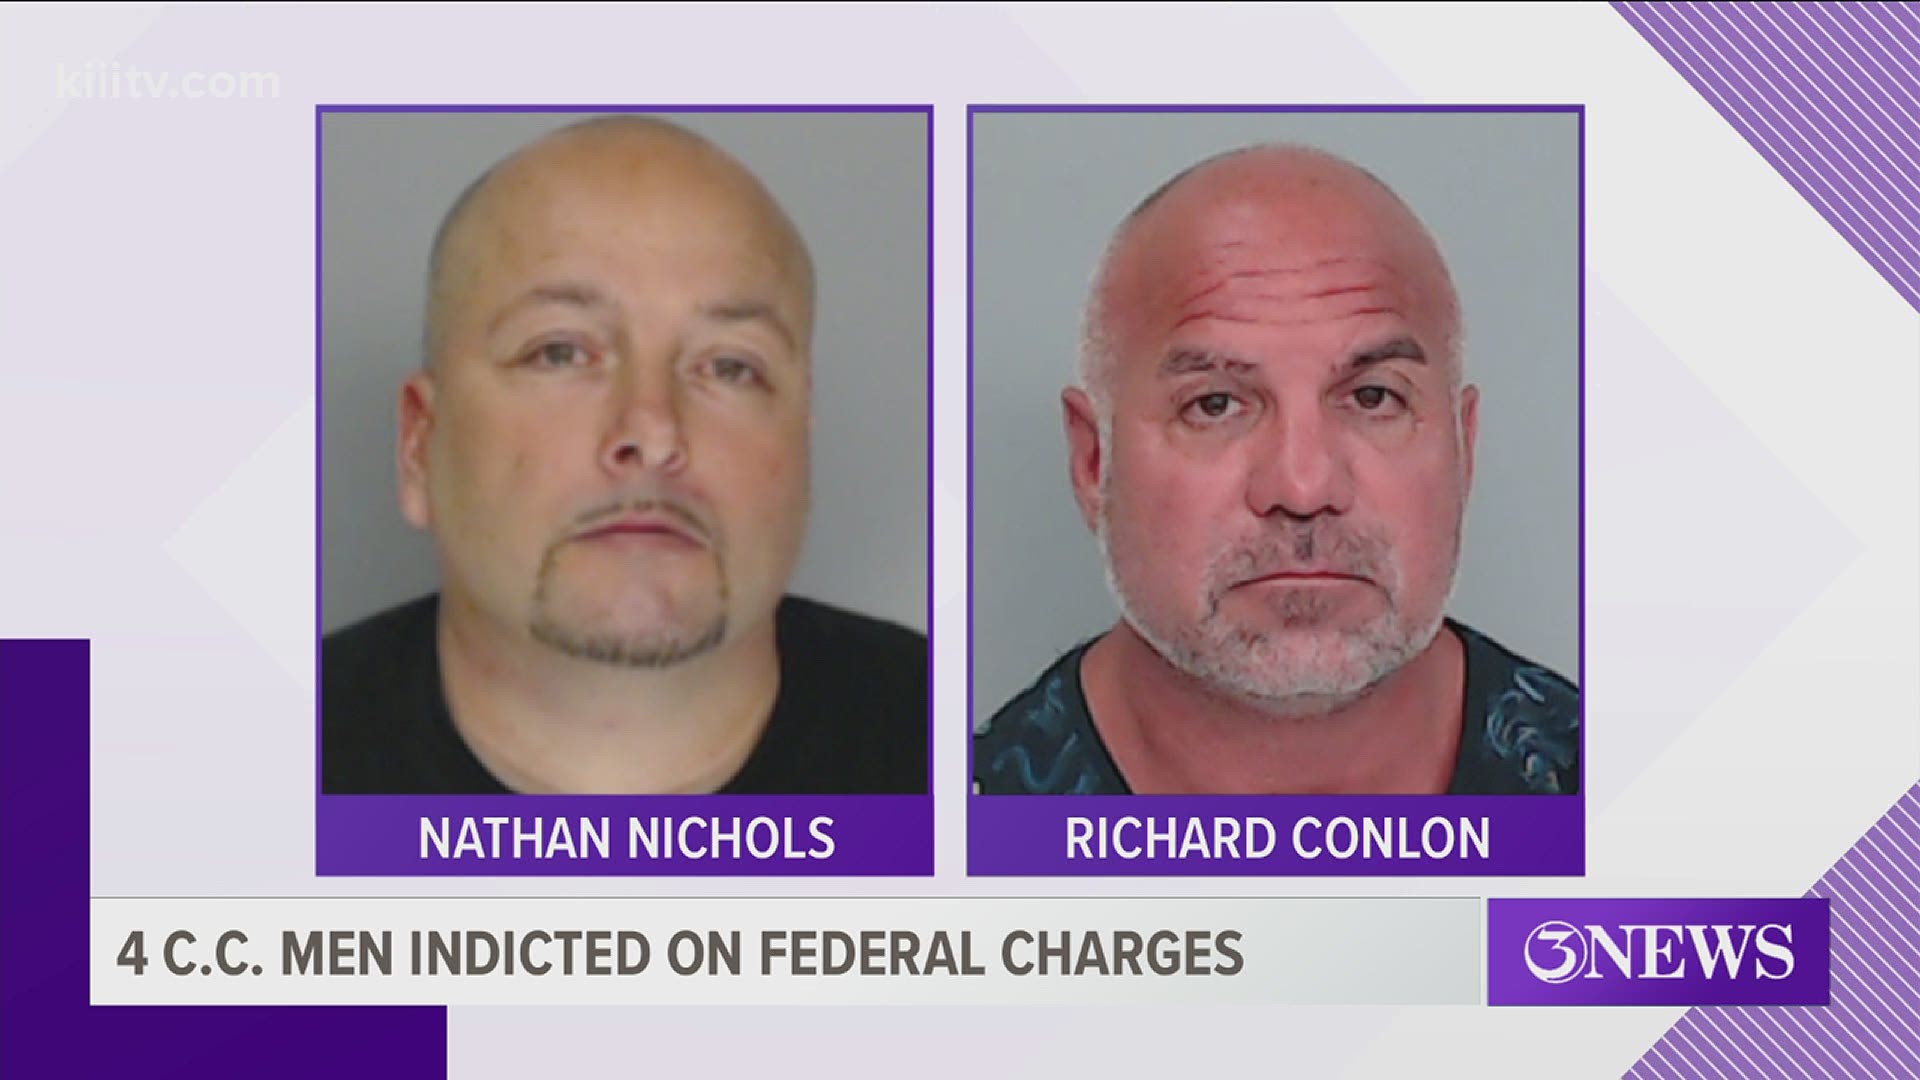 The four men are being charged with "one count of conspiracy to commit money laundering and four counts of operating an illegal gambling business.”